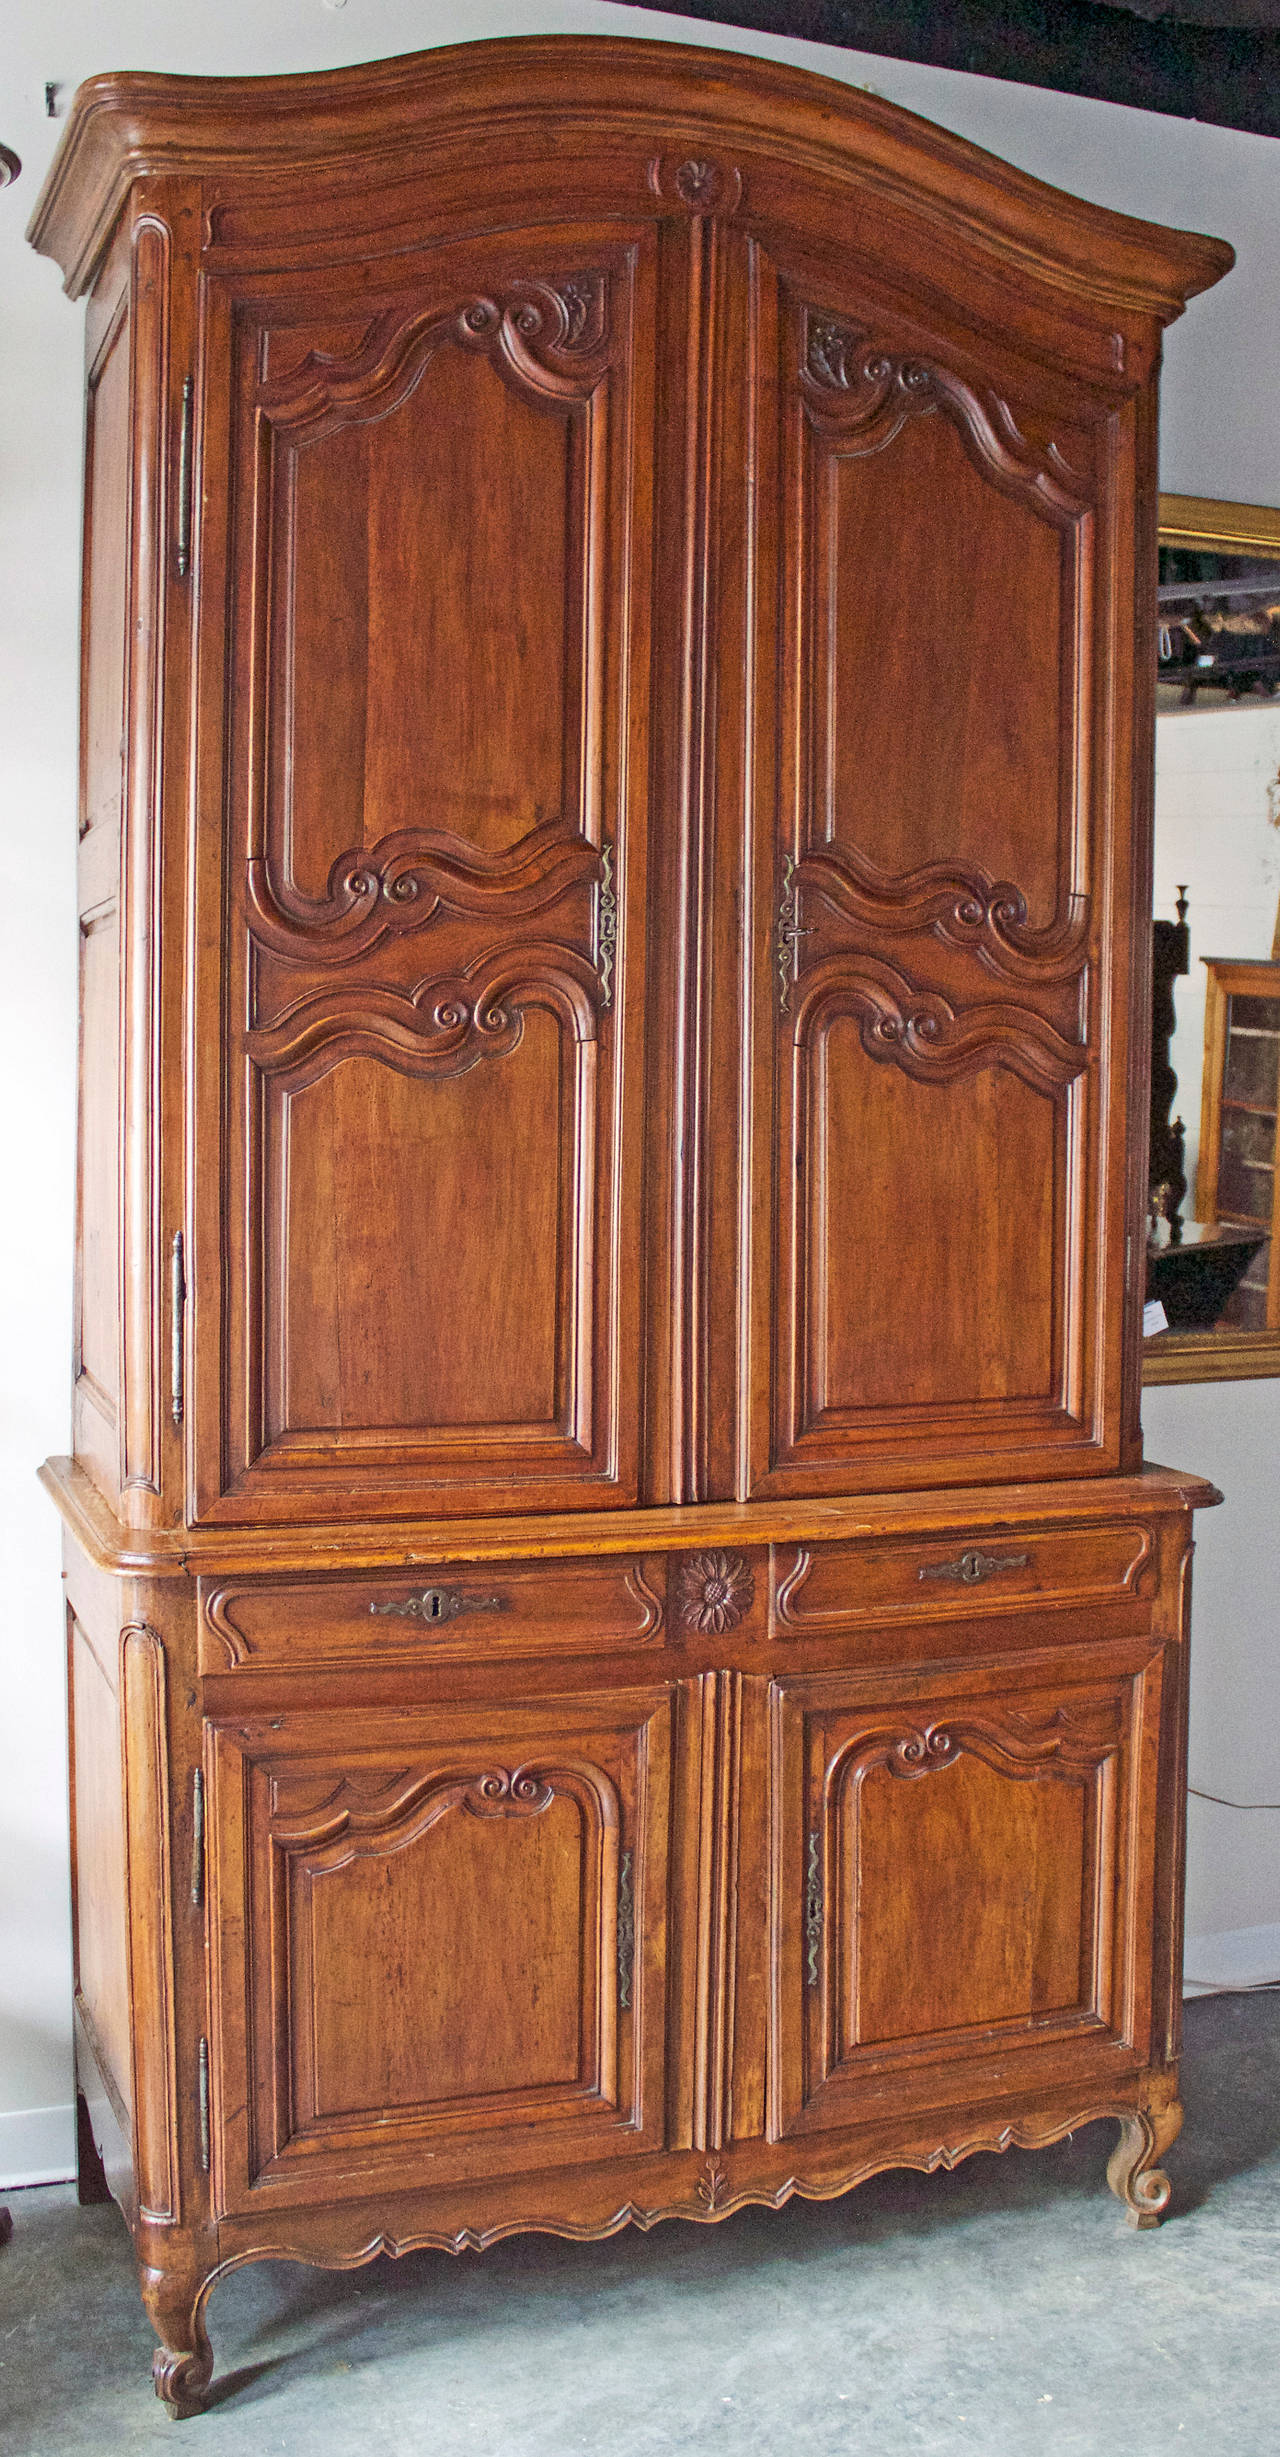 Present since the Renaissance it's only under Louis XV that the buffet deux corps like this one will acquire a gracefully shaped outline and curves. The top part is notably higher than the bottom one and become topped with an arched cornice in the